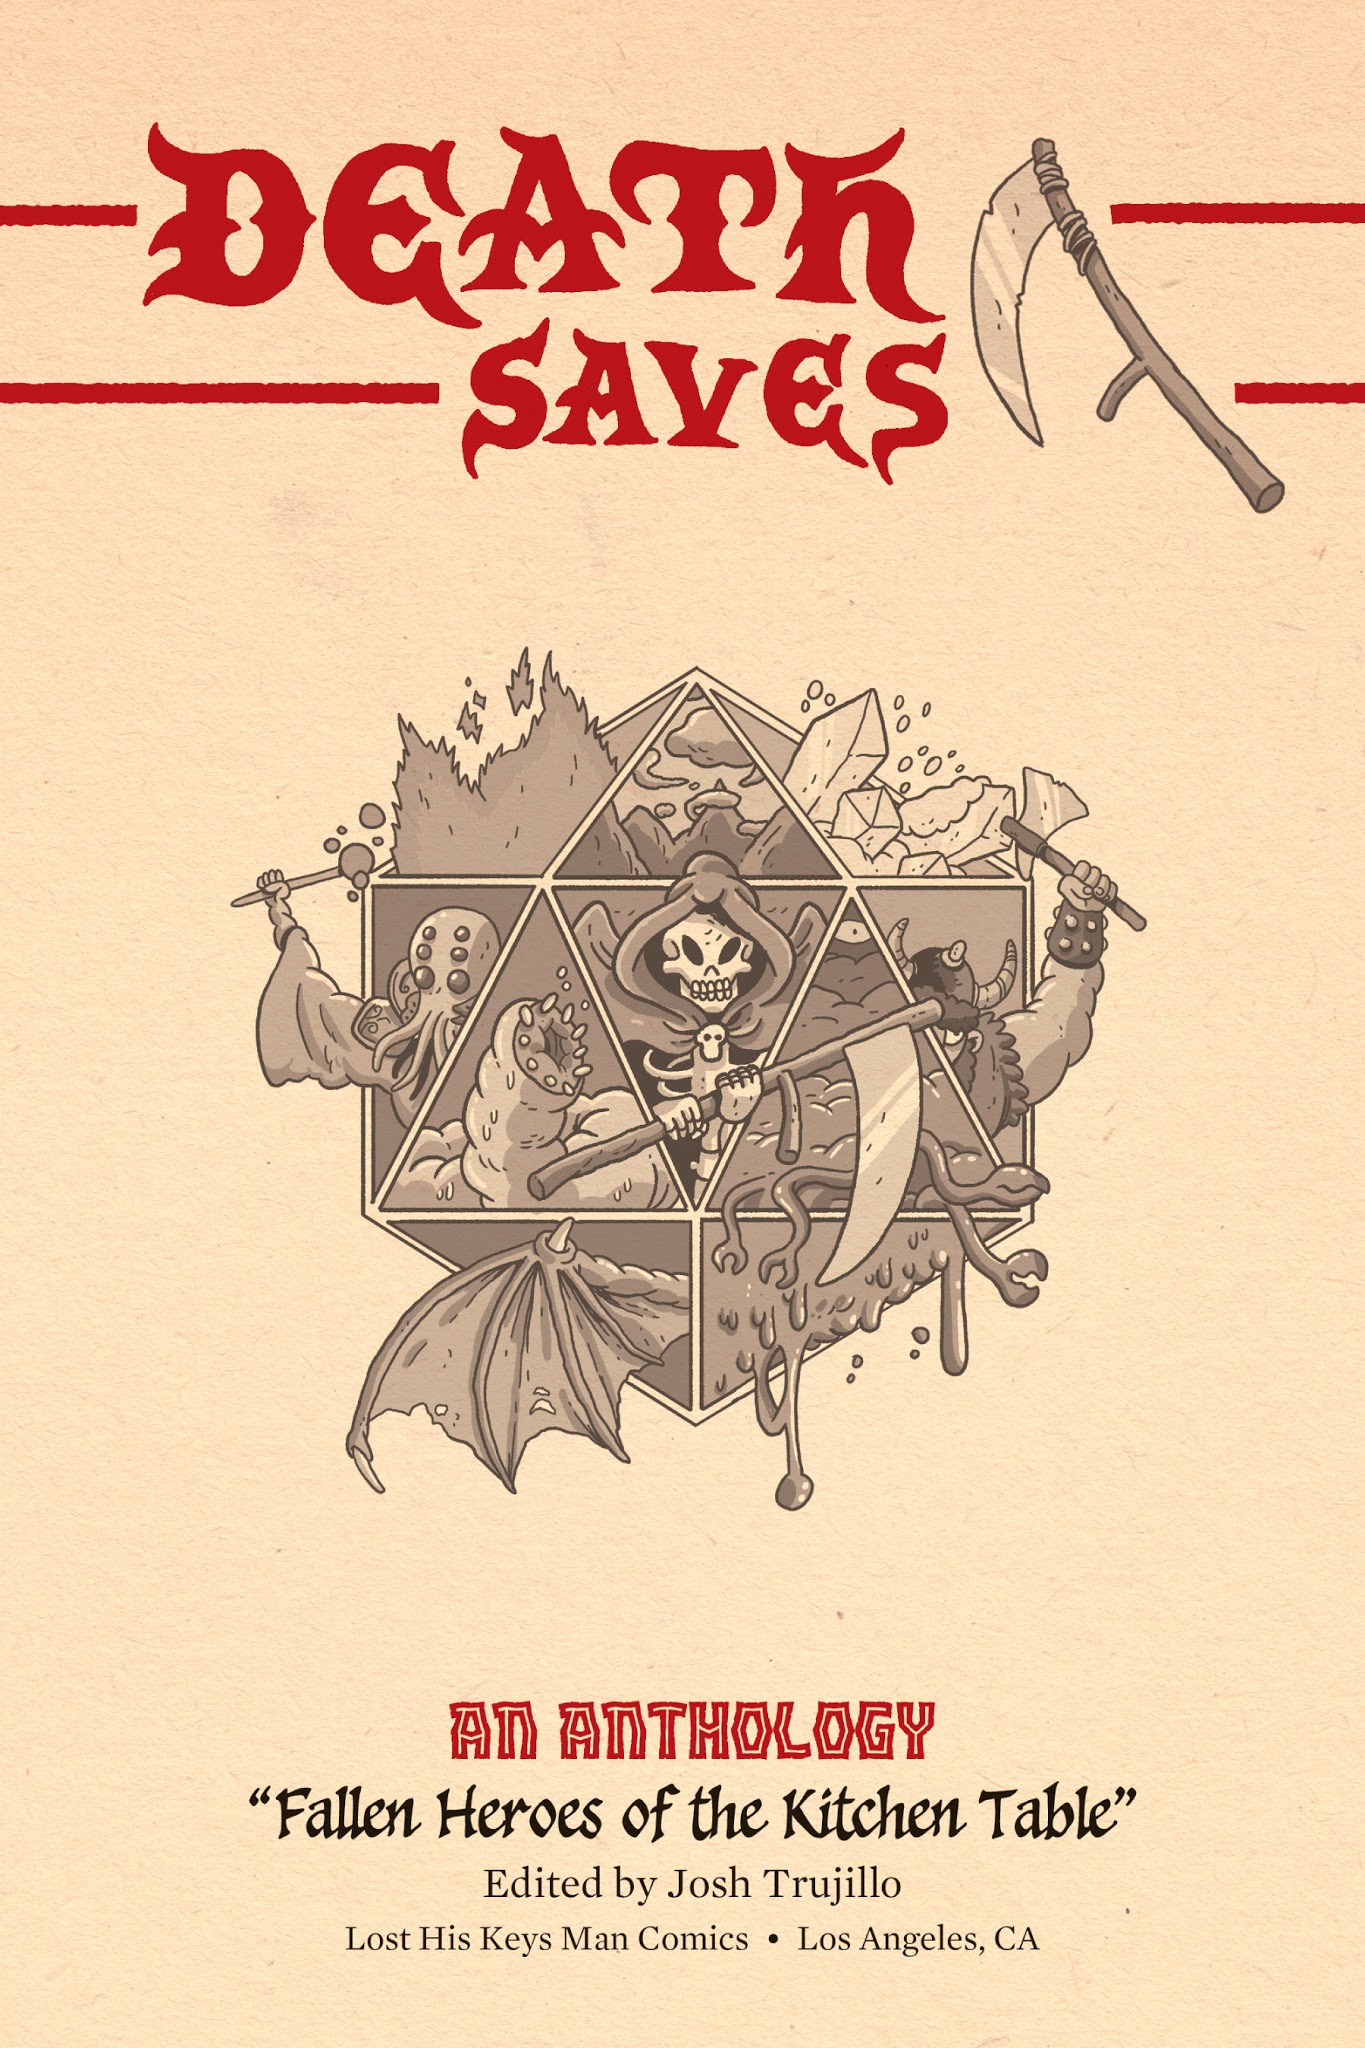 Read online Death Saves comic -  Issue # TPB - 2